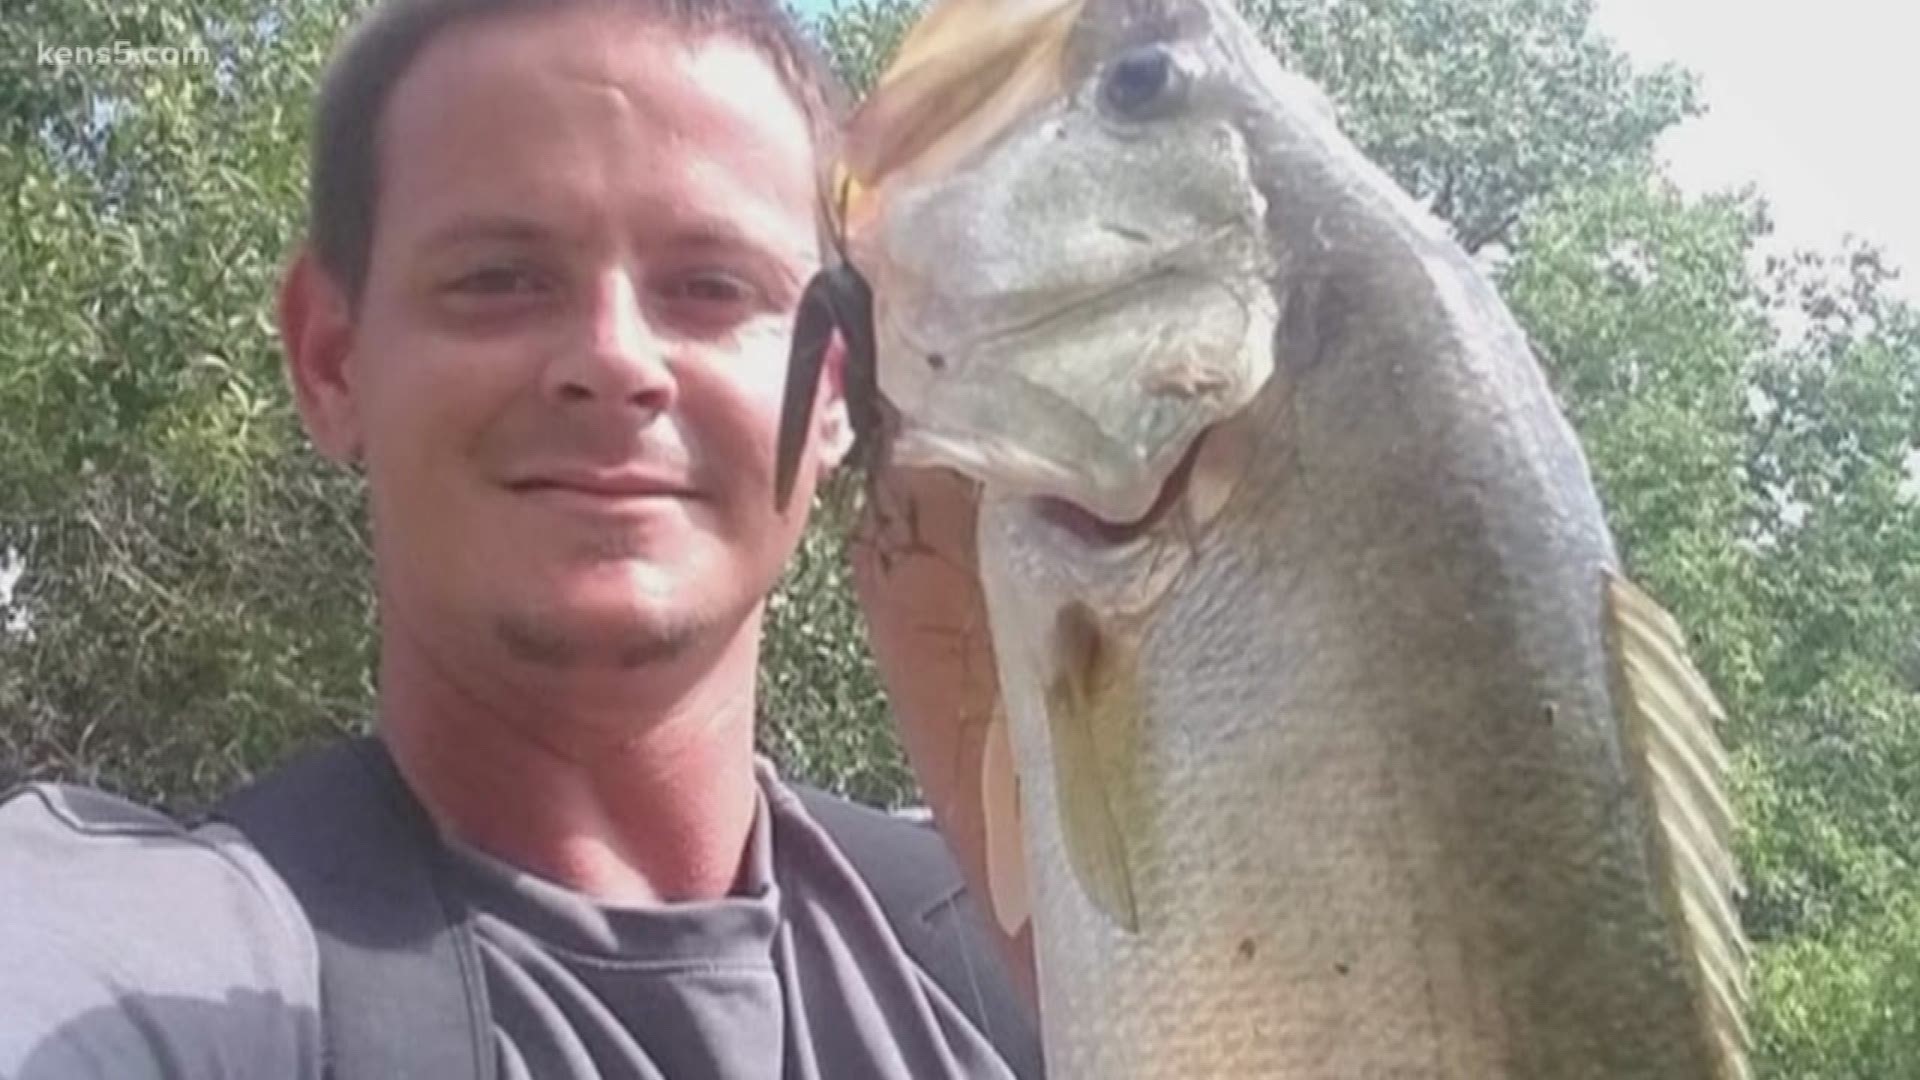 The family of a man whose body was found floating in Calaveras Lake last month is convinced he is not a drowning victim. They say he was murdered.